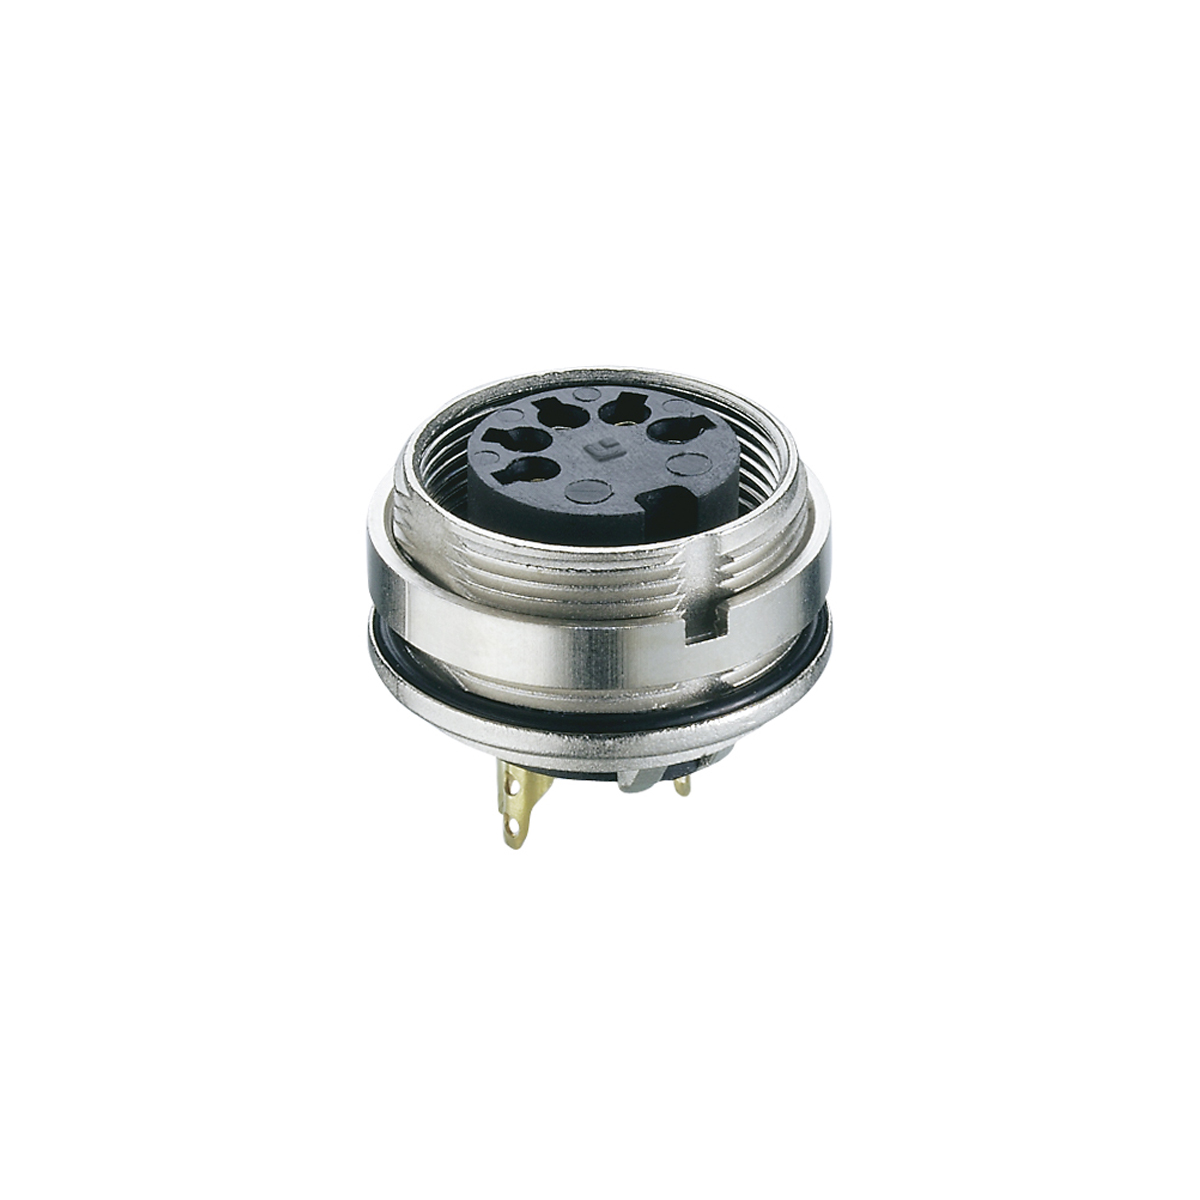 Lumberg: 305 (Series 03 | Circular connectors with threaded joint M16 acc. to IEC 61076-2-106, IP40/IP68)